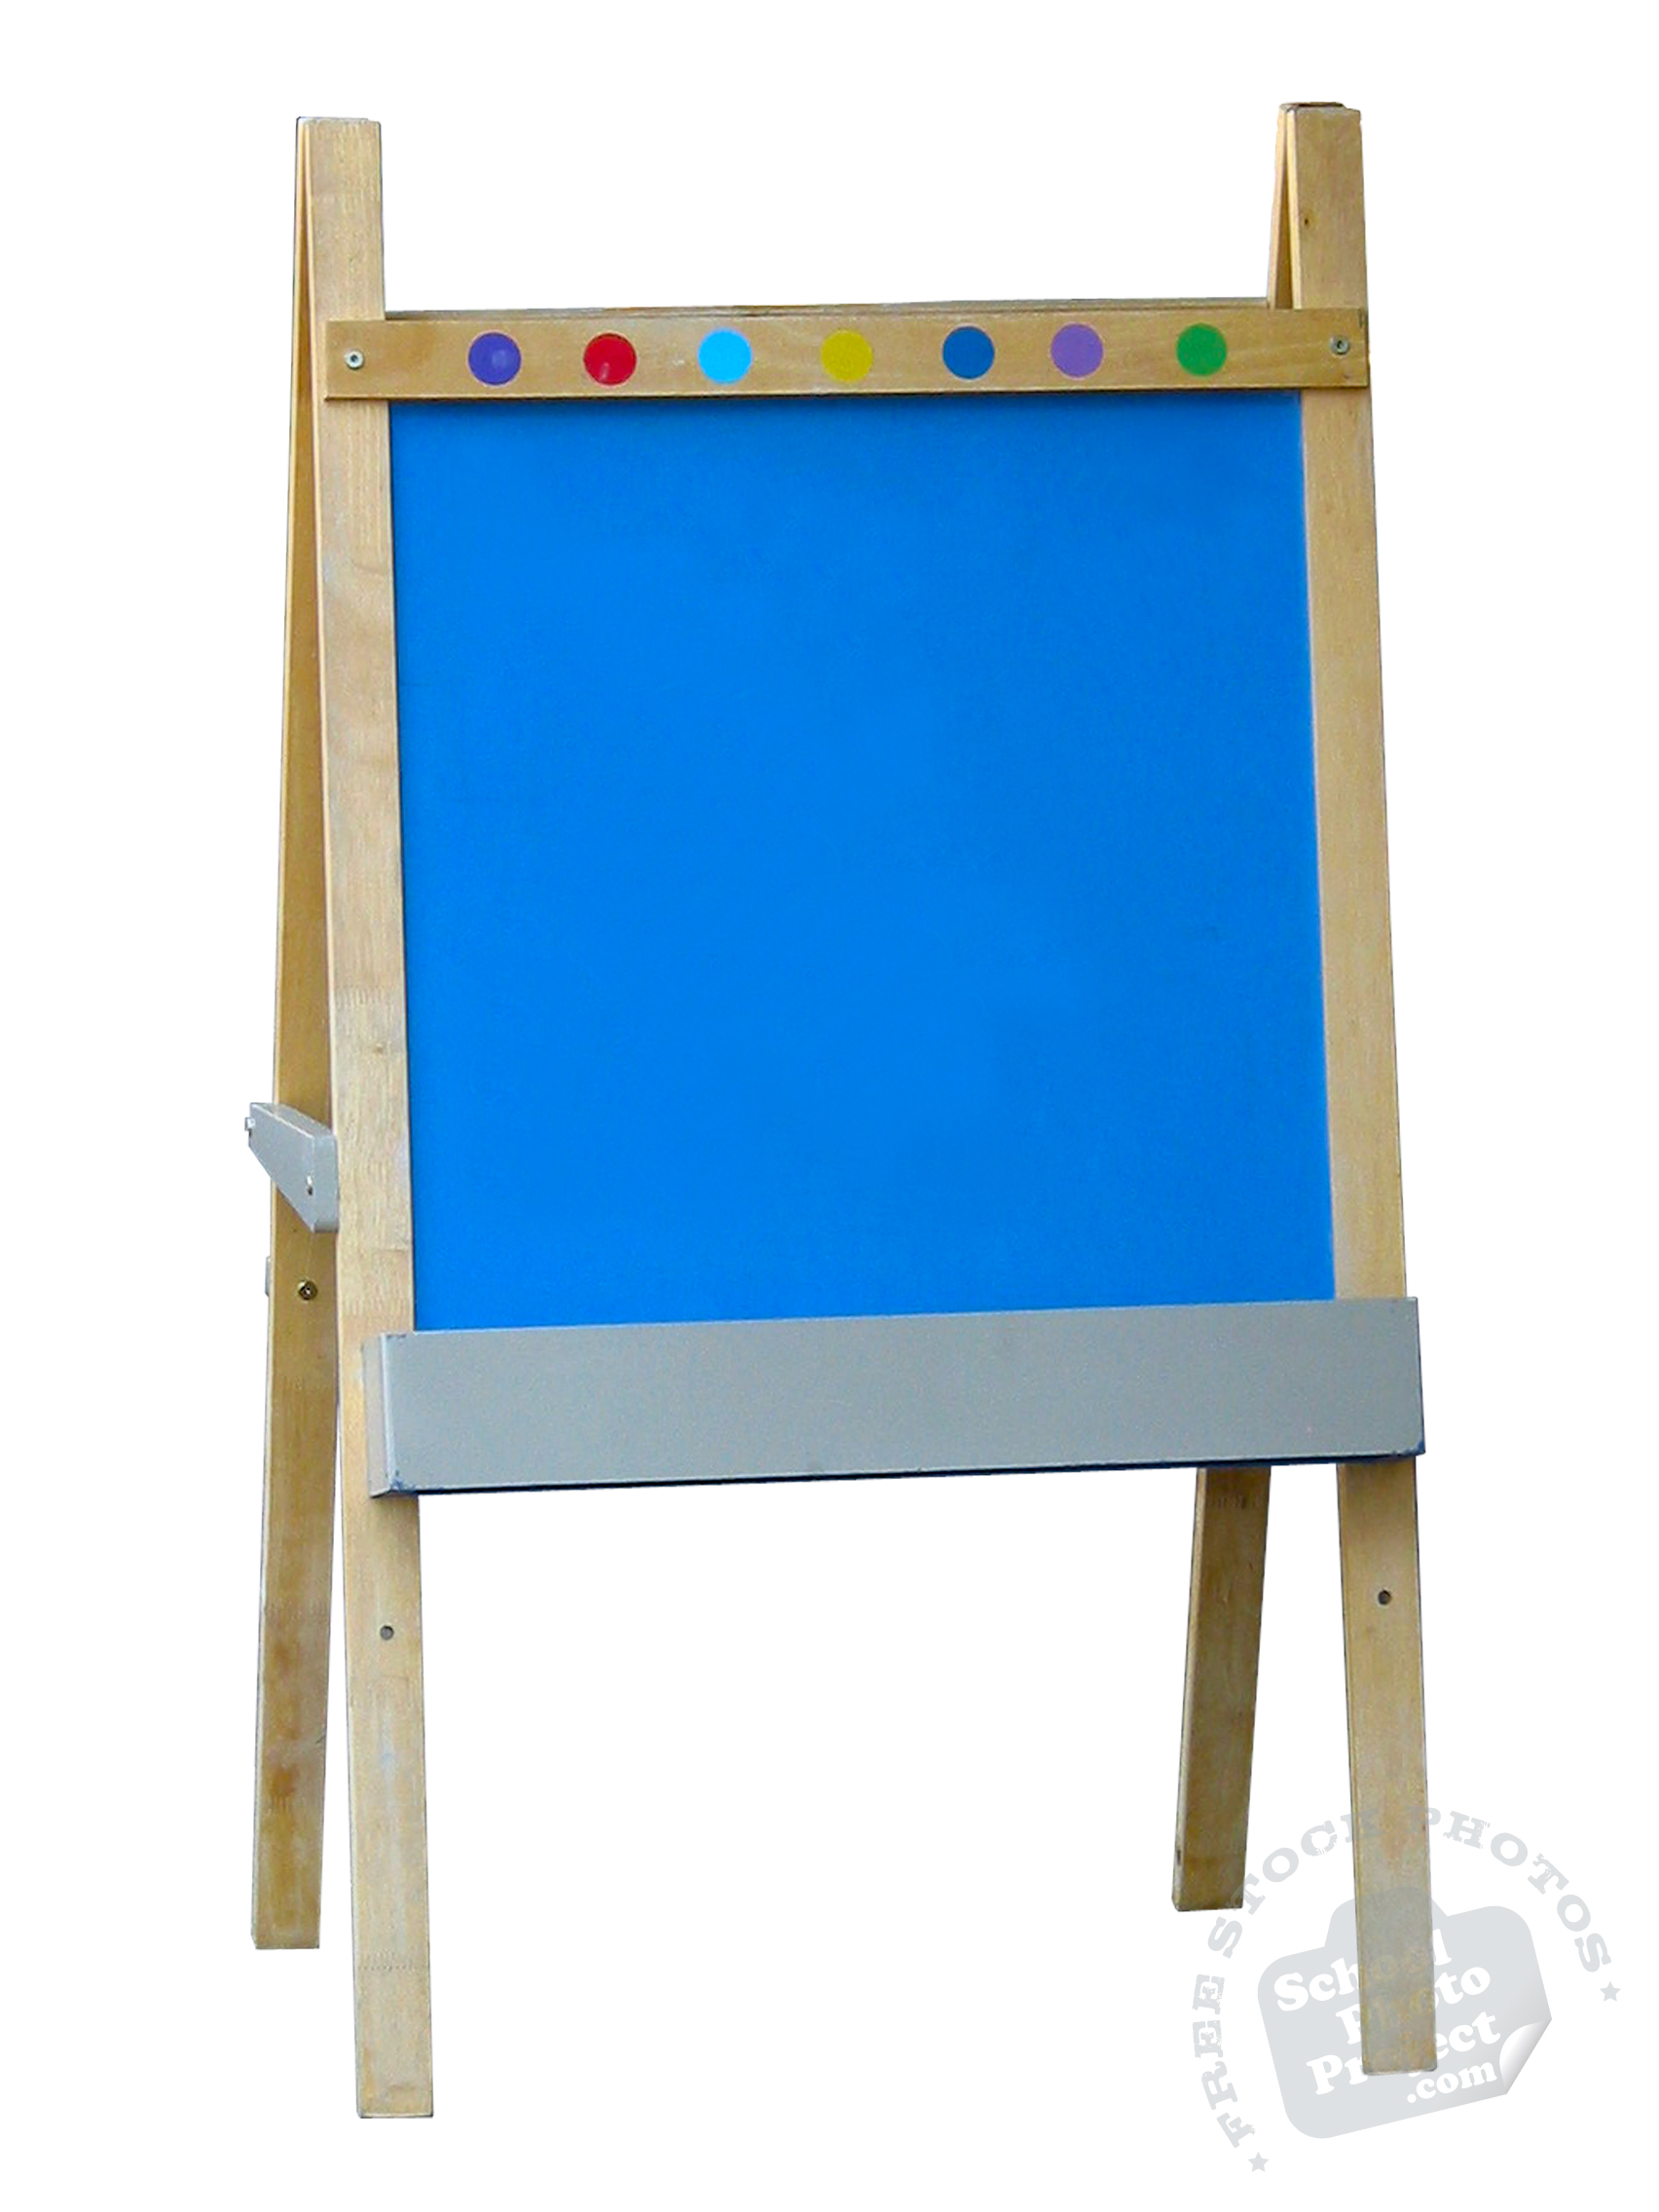 Chalkboard Sign, FREE Stock Photo, Image, Picture: Blank Chalkboard Easel Sign ...1704 x 2272